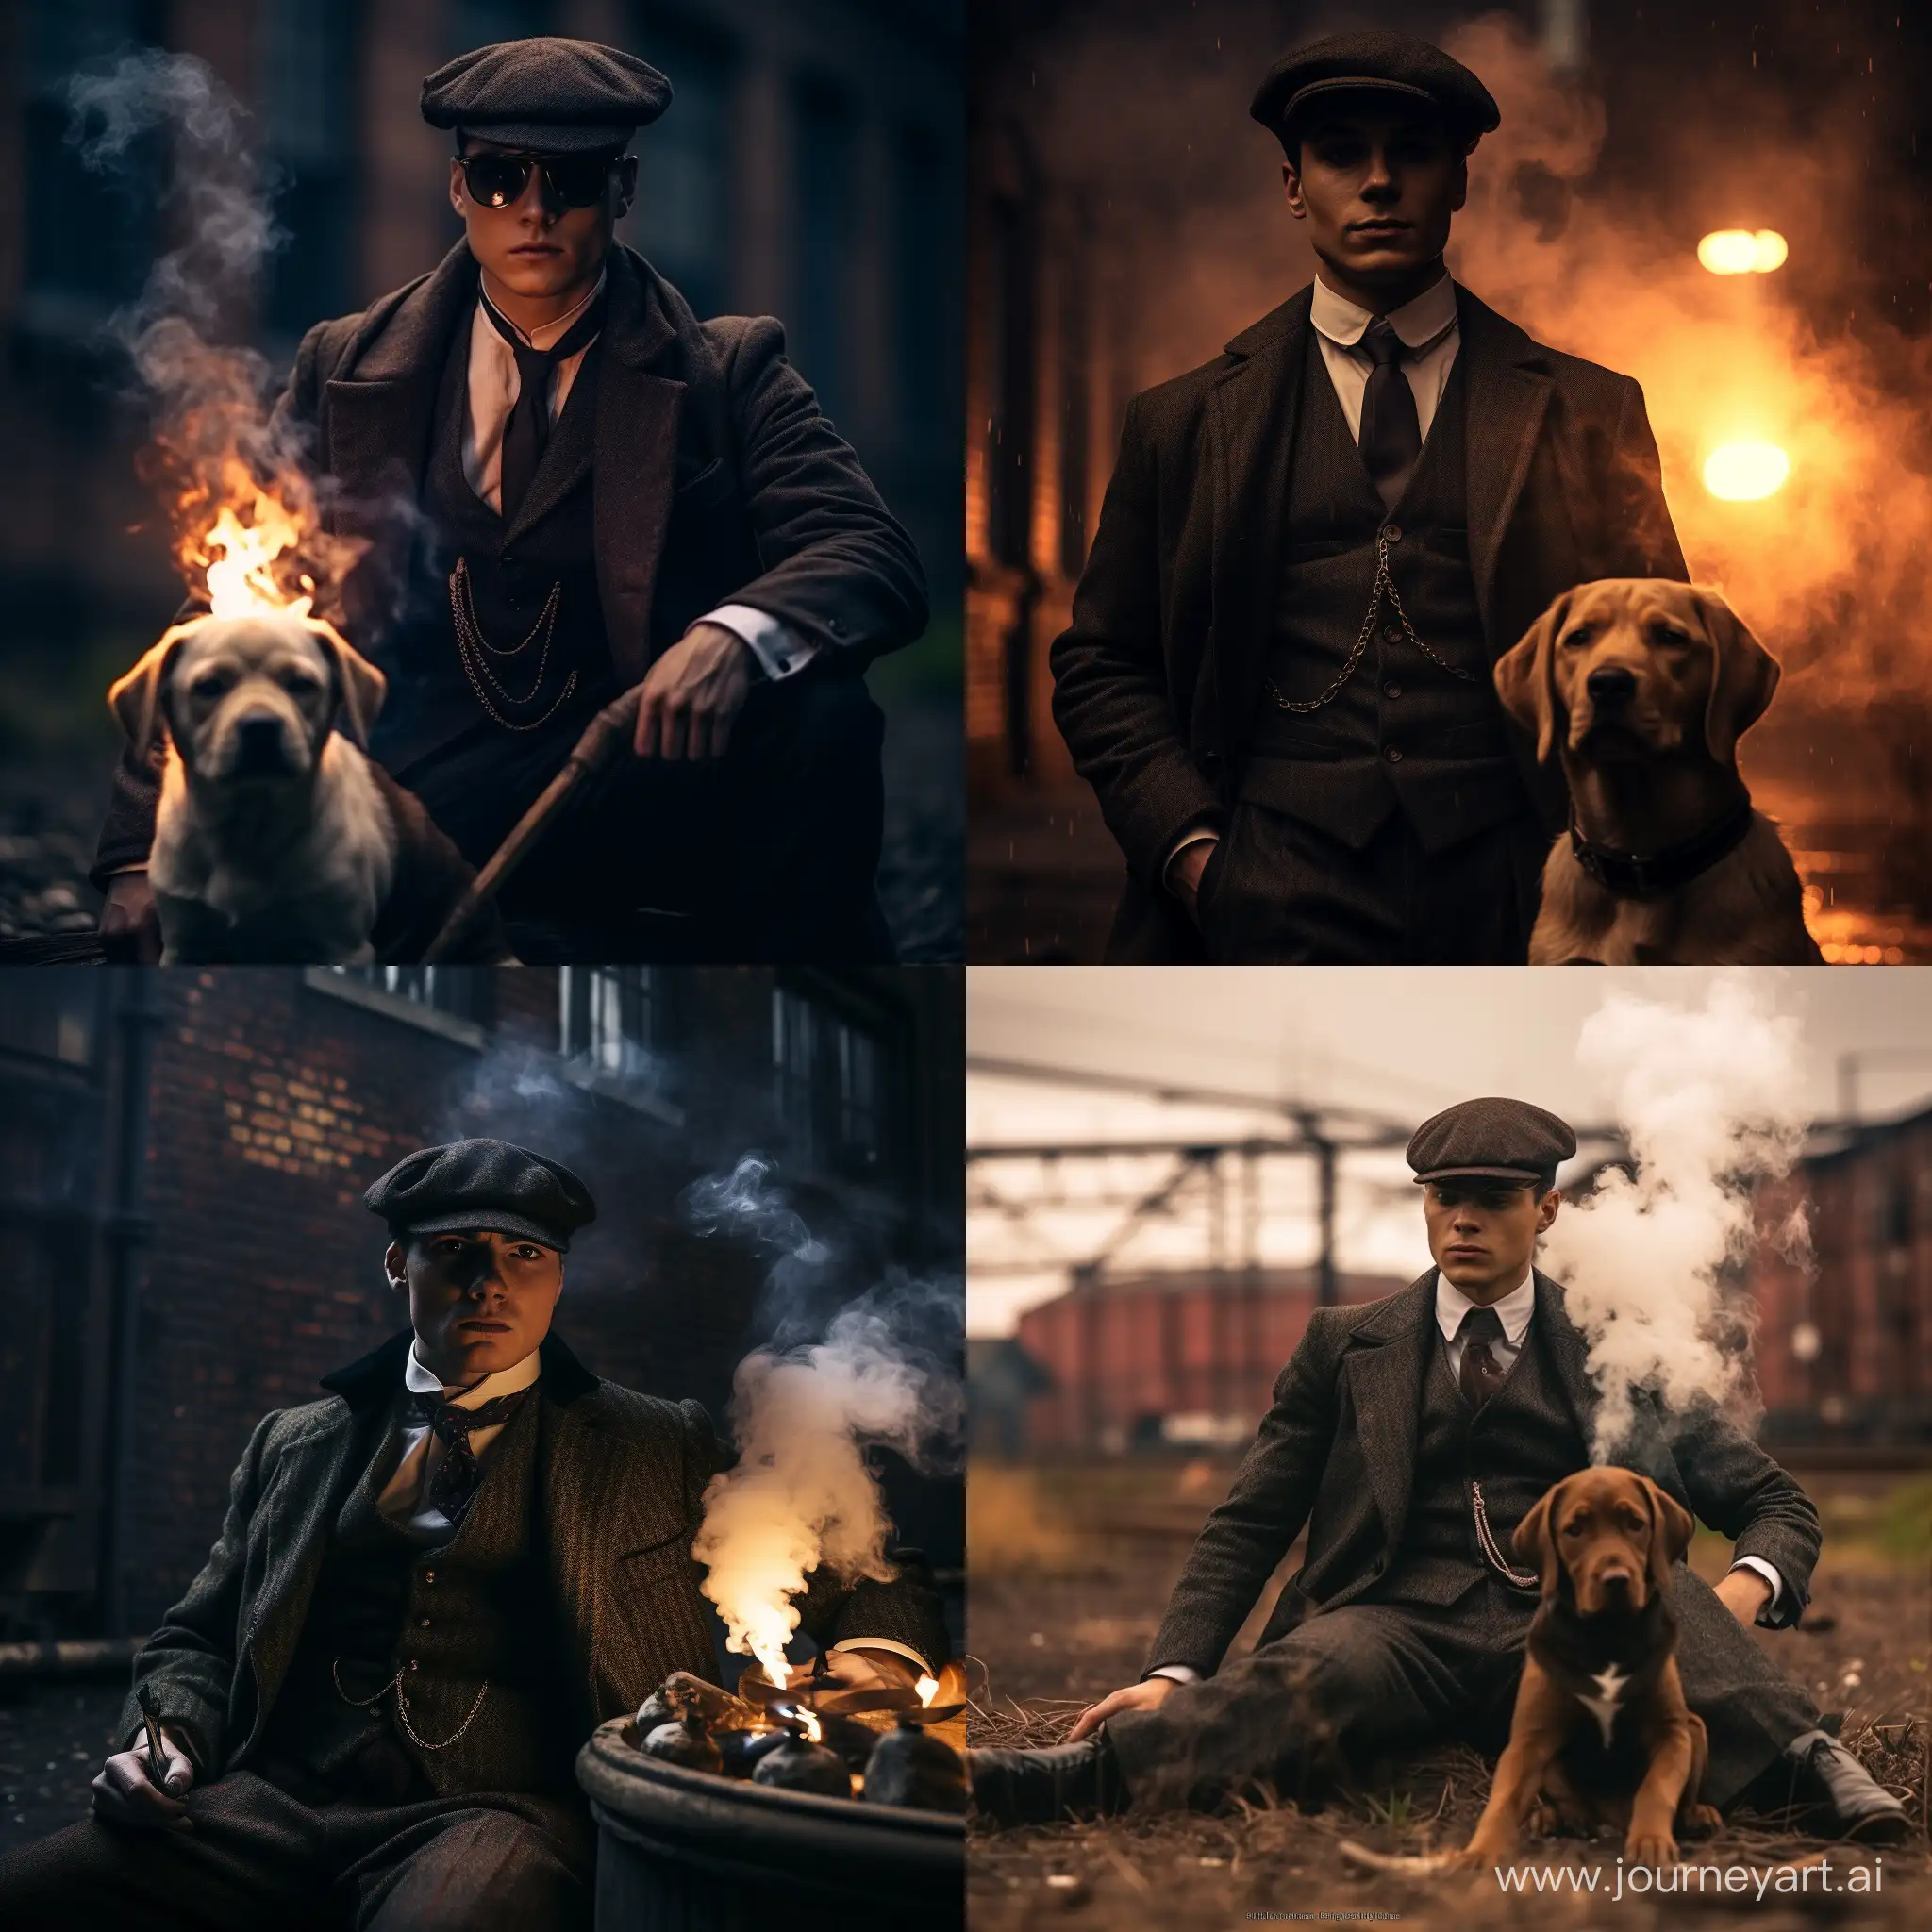 Cosplay of a pug on Thomas Shelby, against the background of an explosion